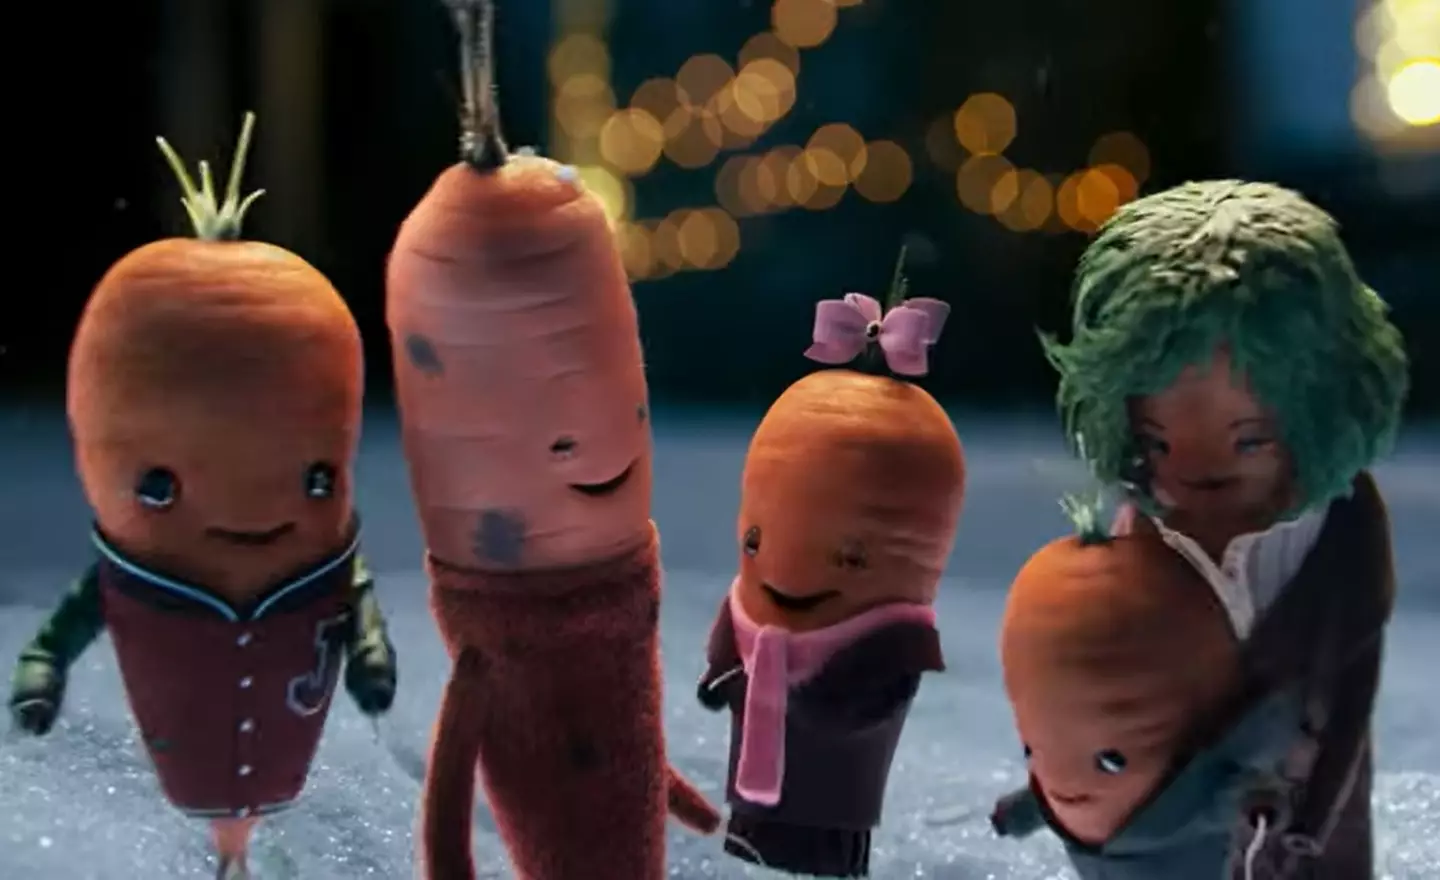 Kevin the Carrot with wife Katie (right) and children Jasper (left), Chantenay (middle) and Baby.